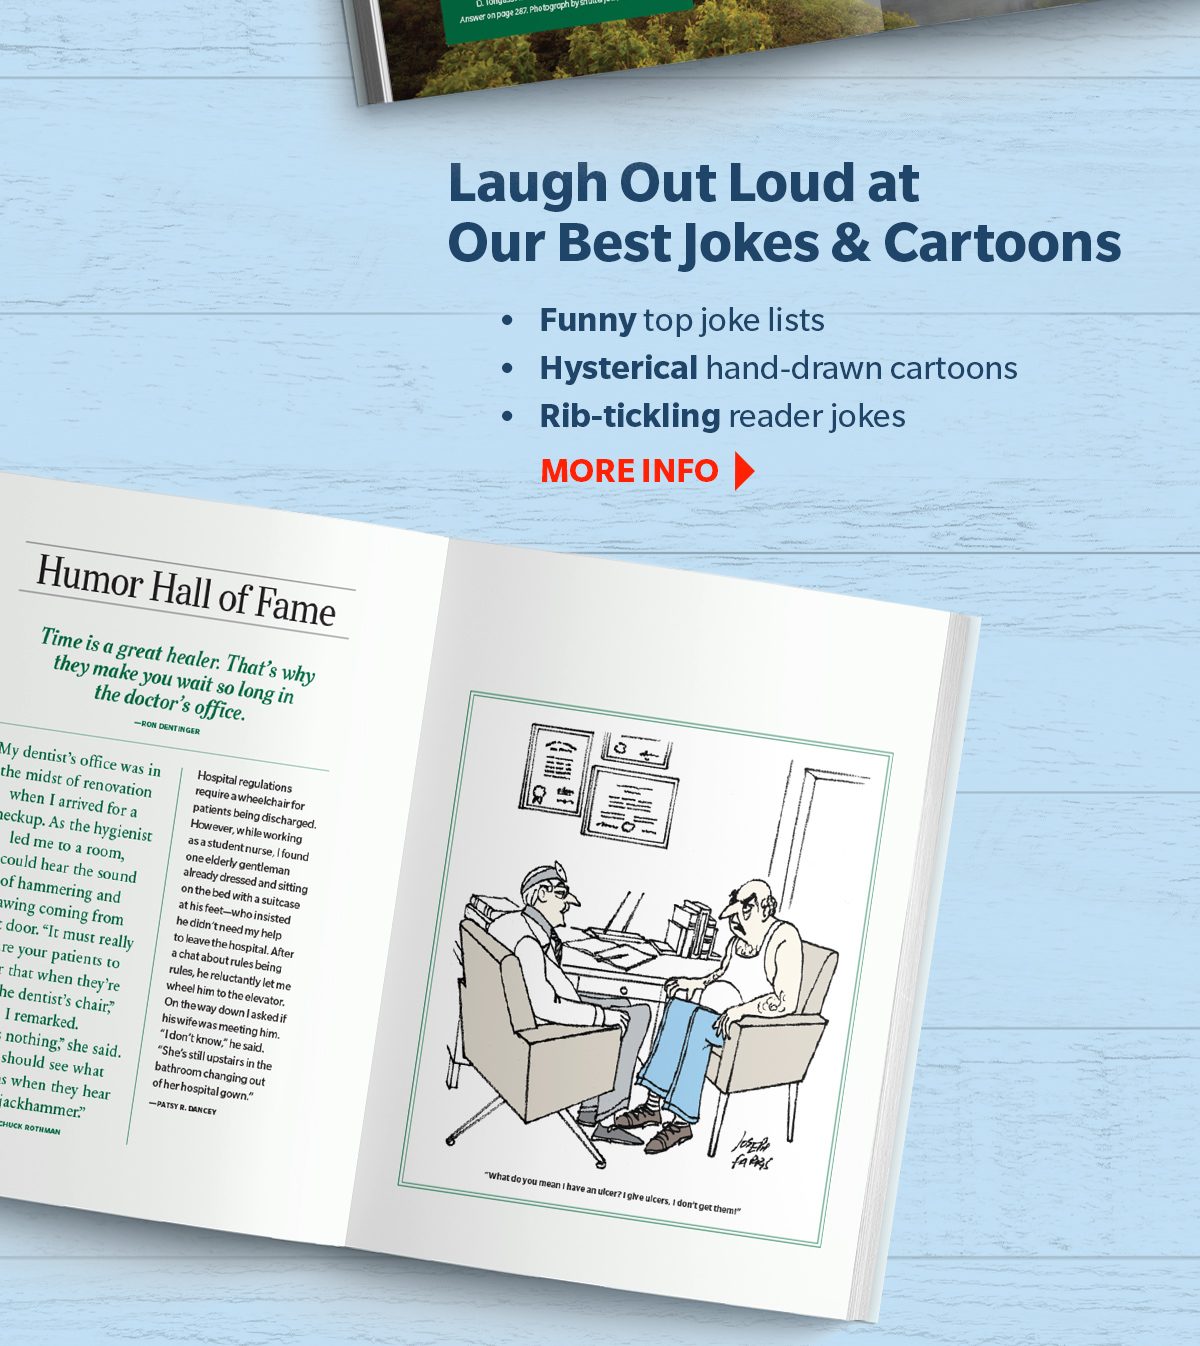 Laugh Out Loud at Our Best Jokes & Cartoons